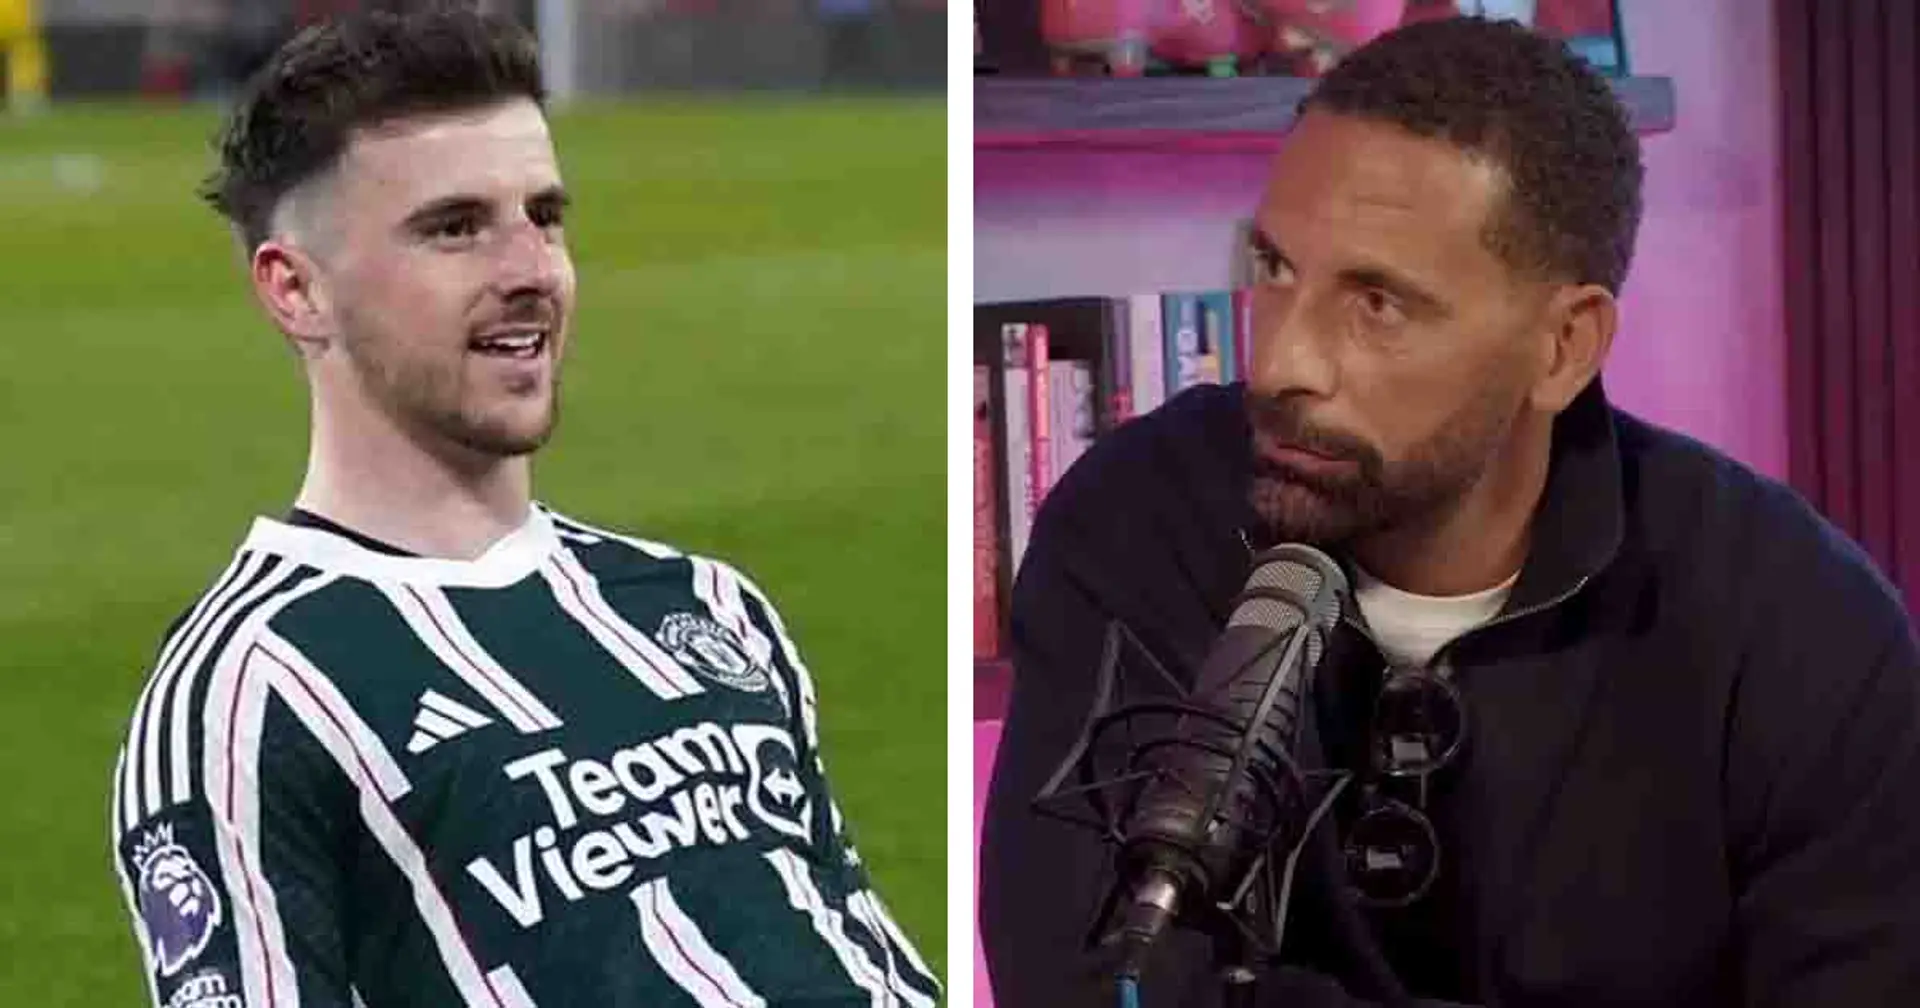 'I need to shout out': Rio Ferdinand tips Mount for bigger things after Brentford goal